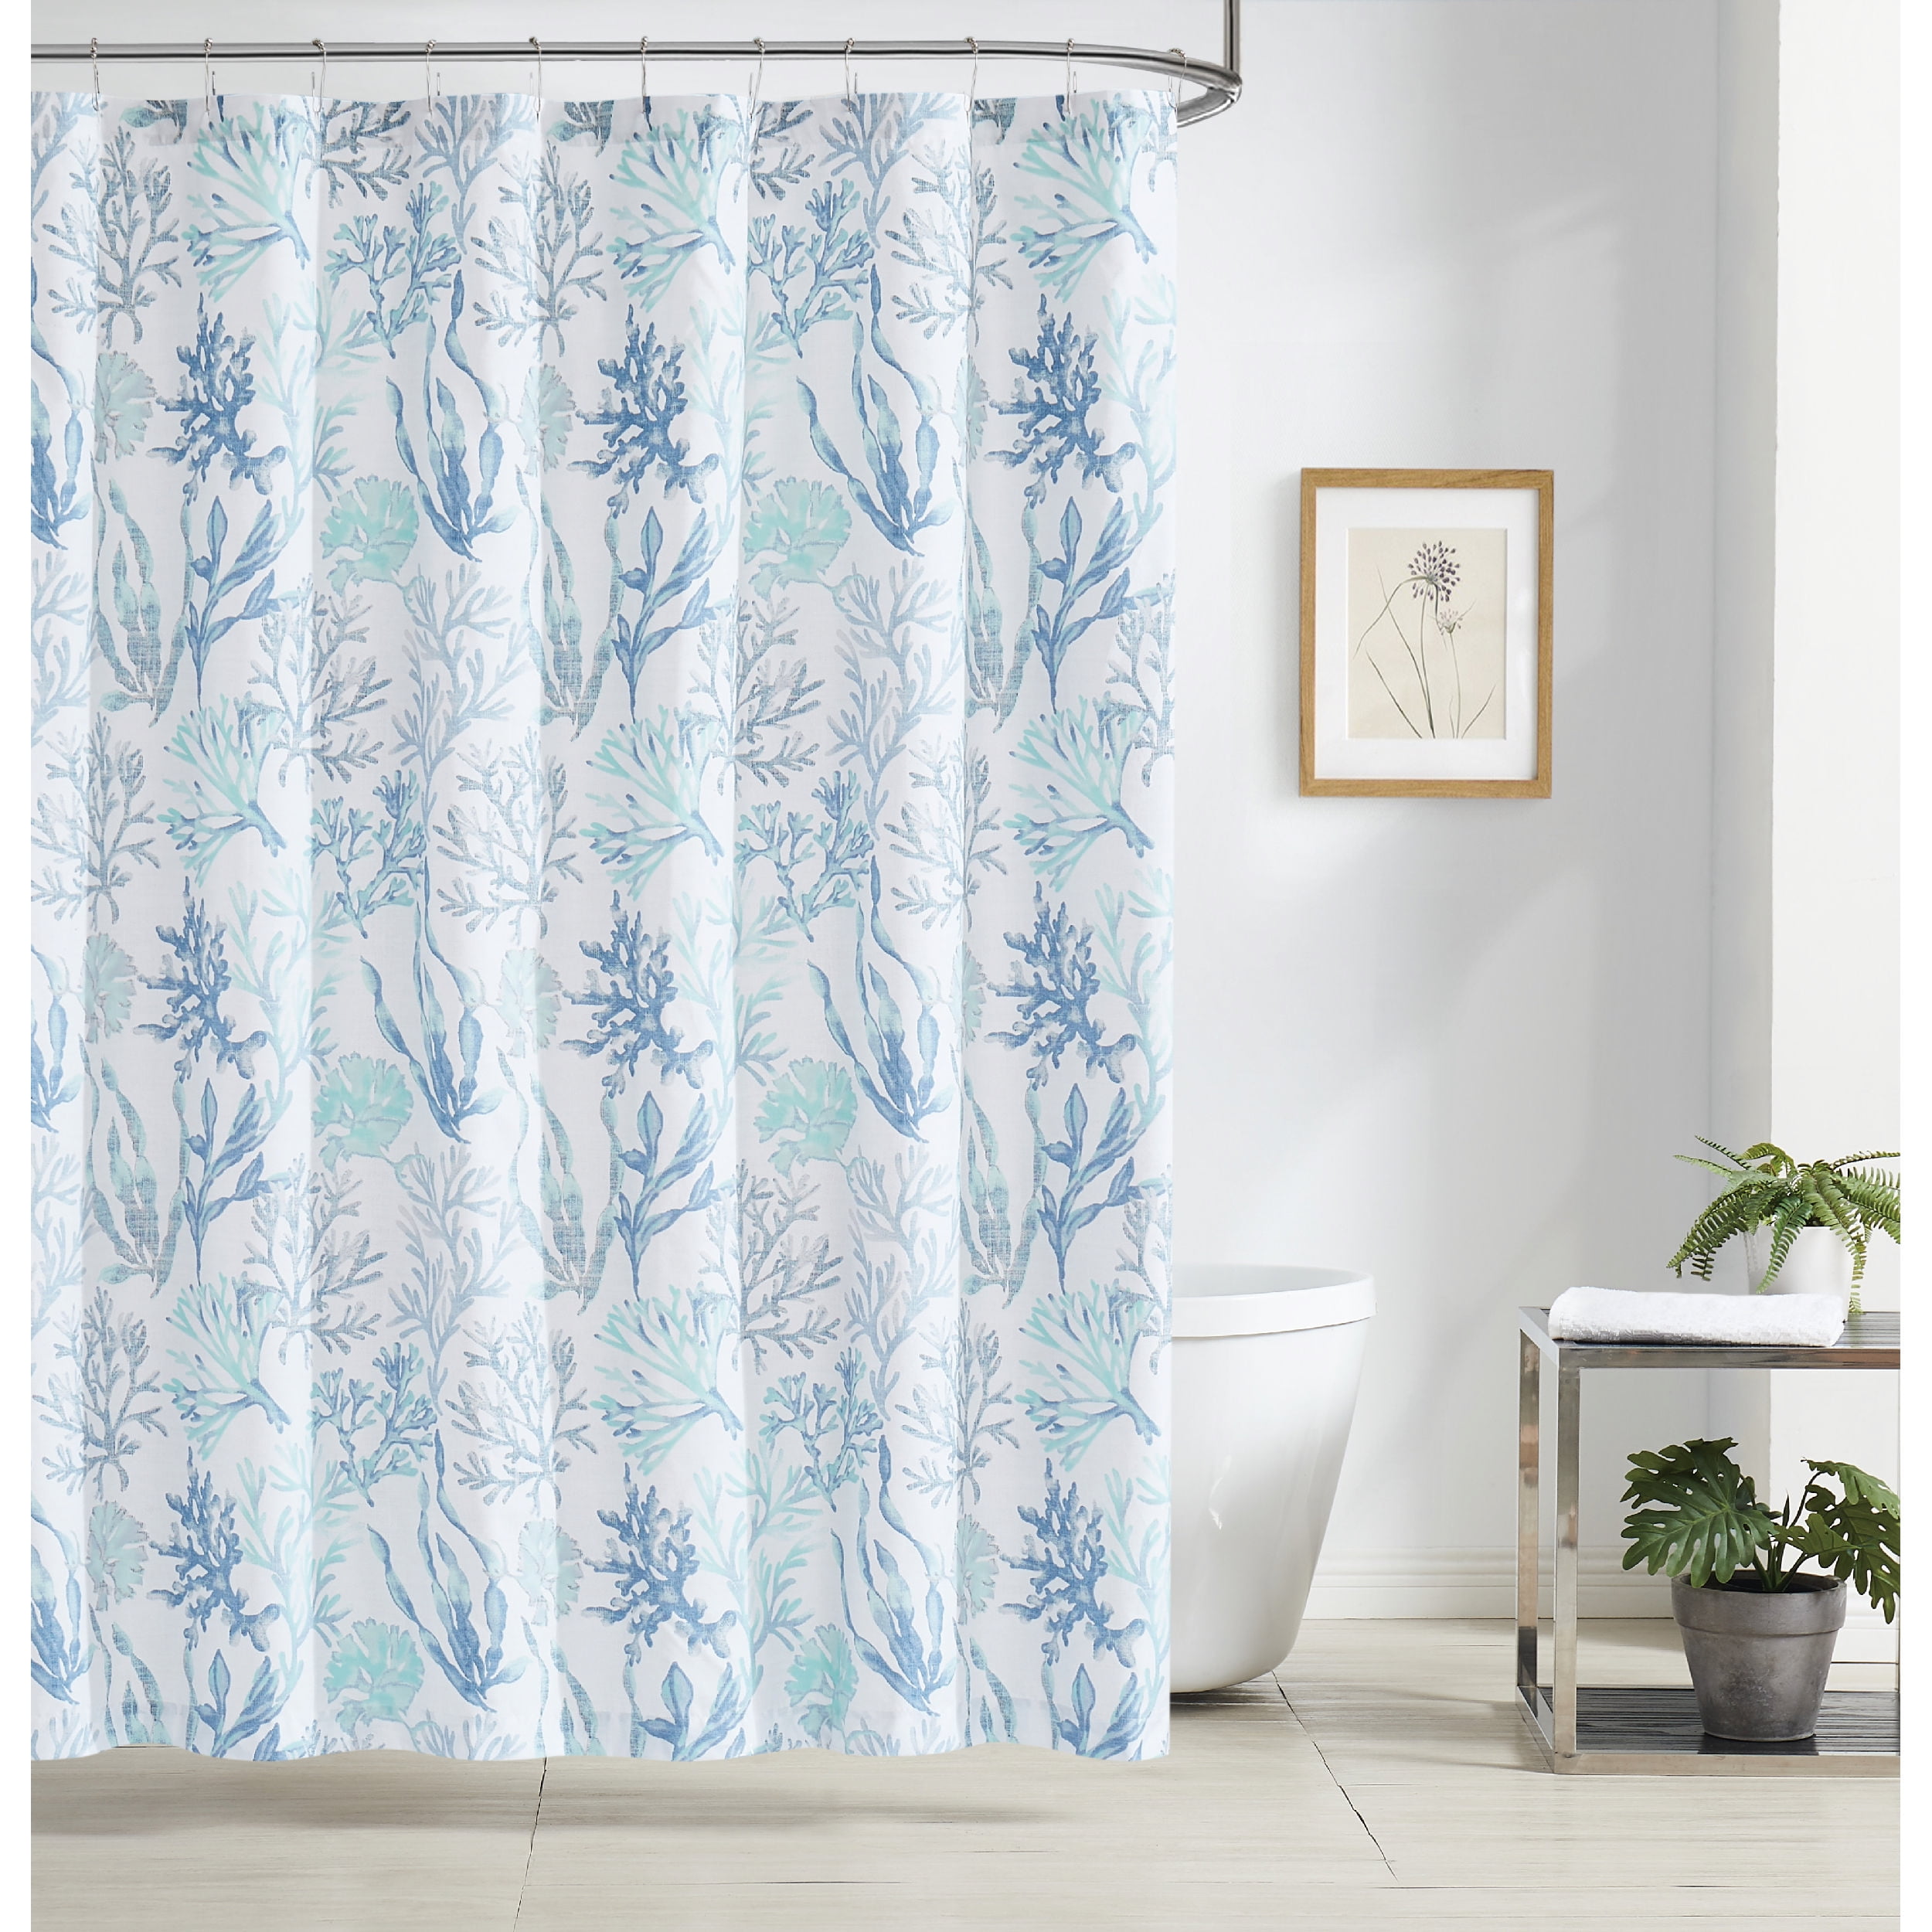 Chic Tropical Palm Leaf Polyester Bath Tub Shower Curtain With Hooks Rings 71" 